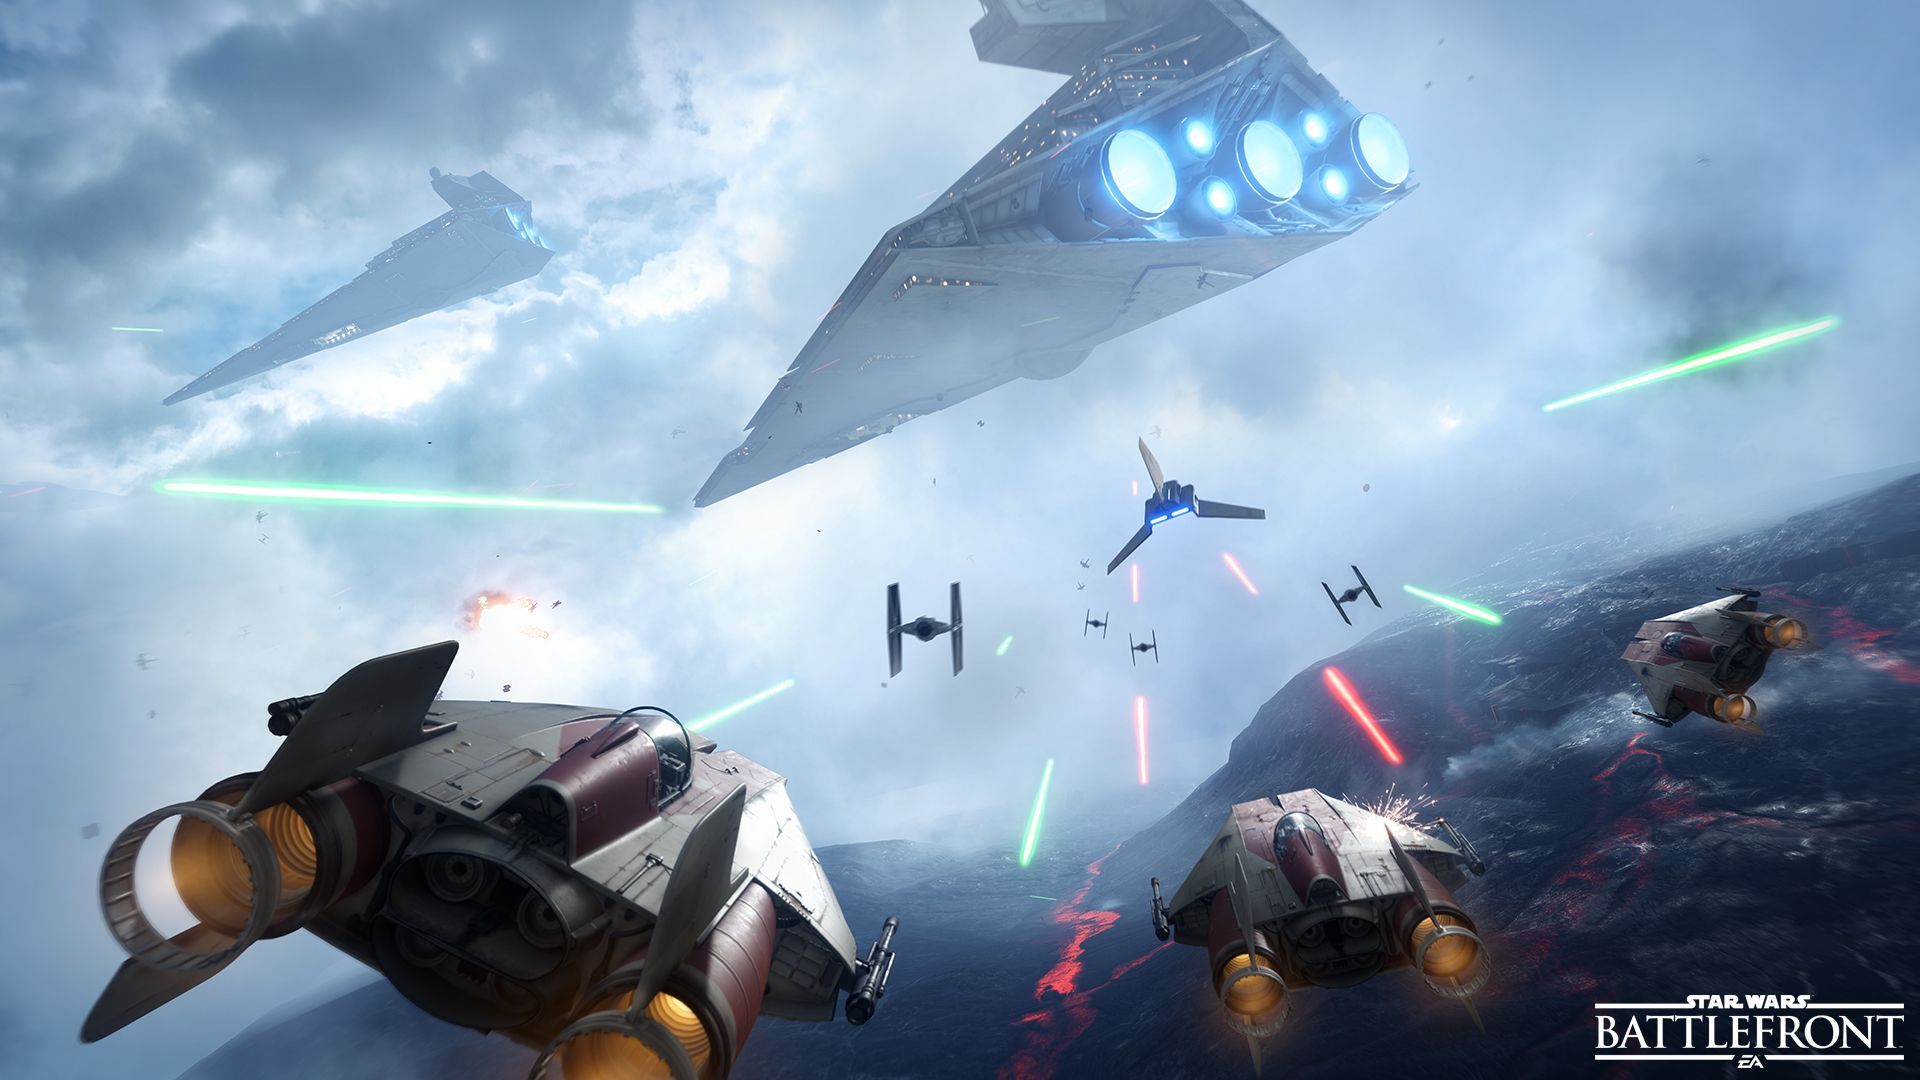 What We'd Like to See in 'Star Wars Battlefront's DLC